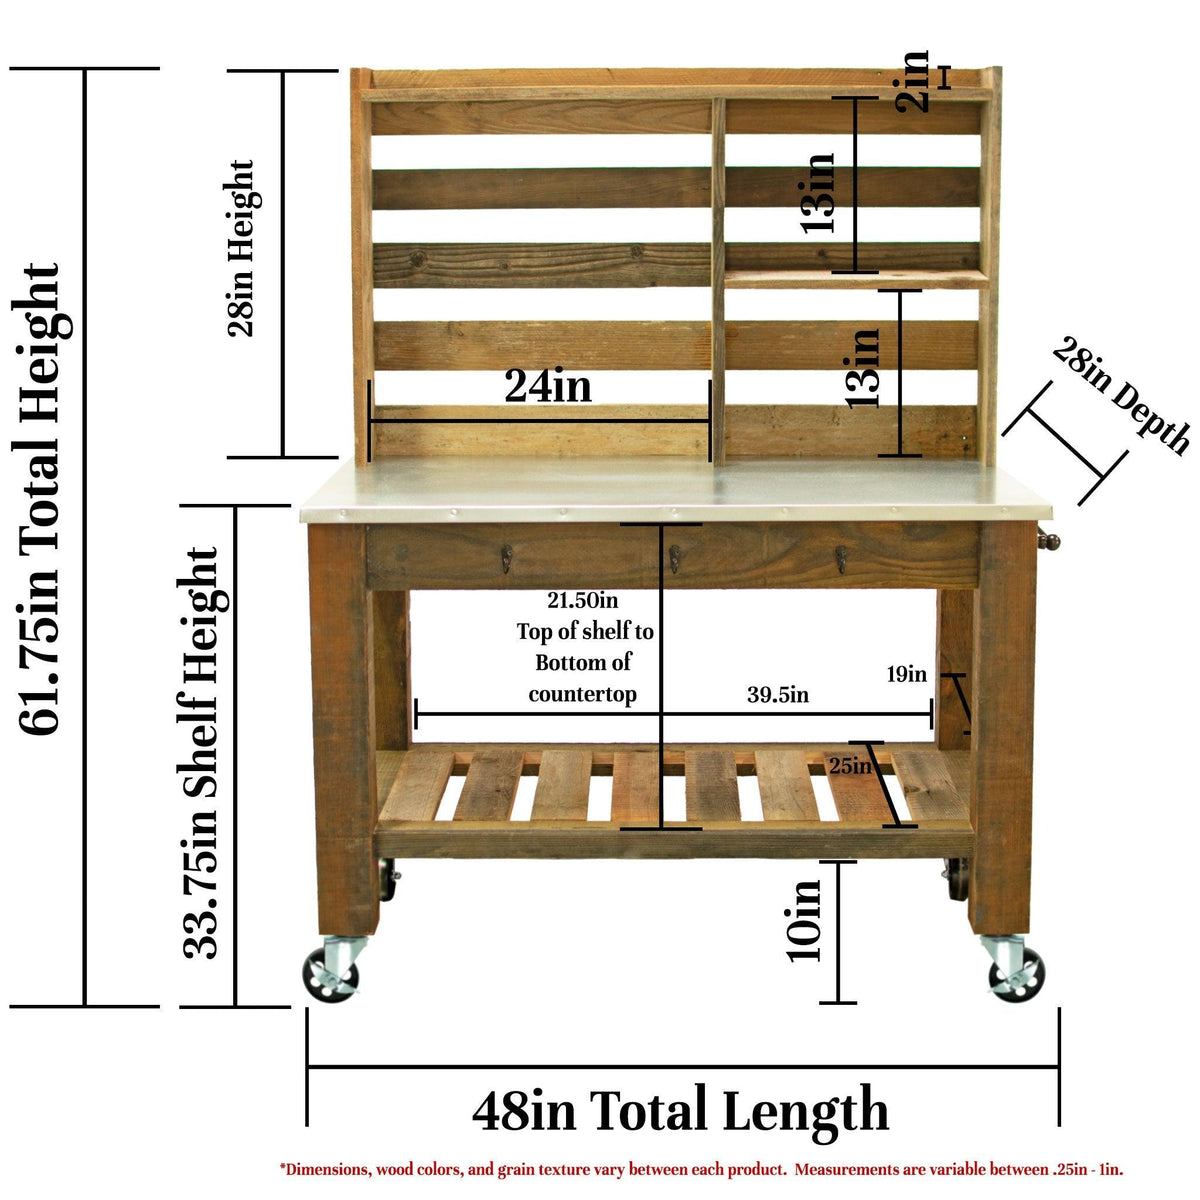 Dimensions and specs of Lee Display's Potting Table made with 5in Galvanized Steel Casters.